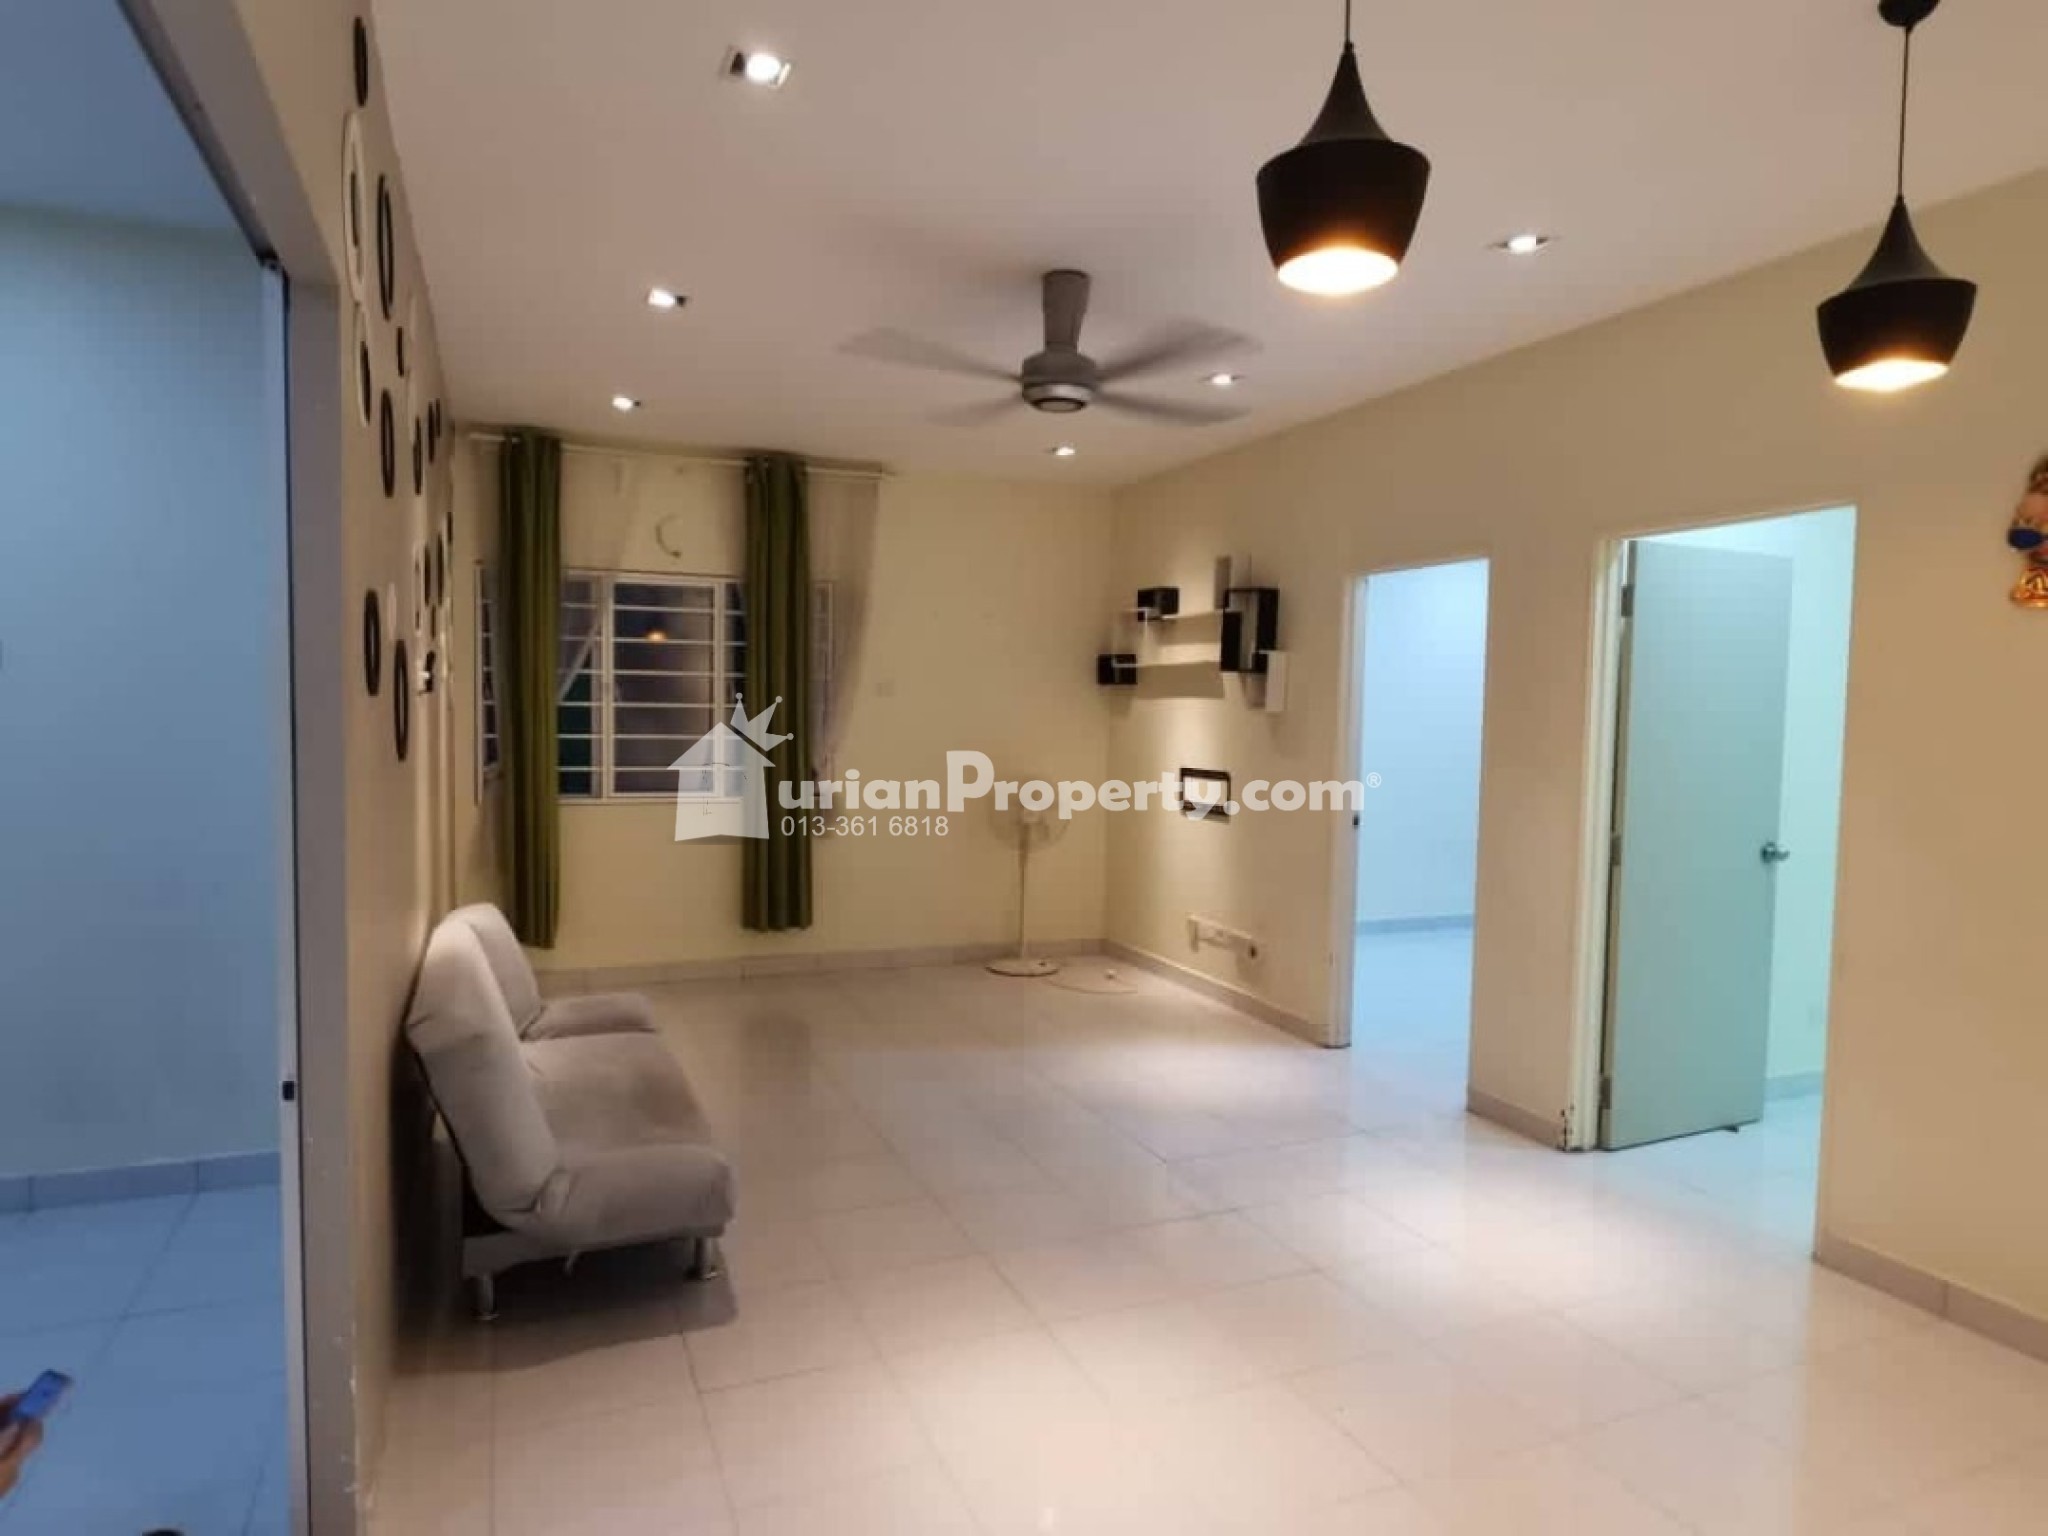 Apartment For Sale at Teratai Residence